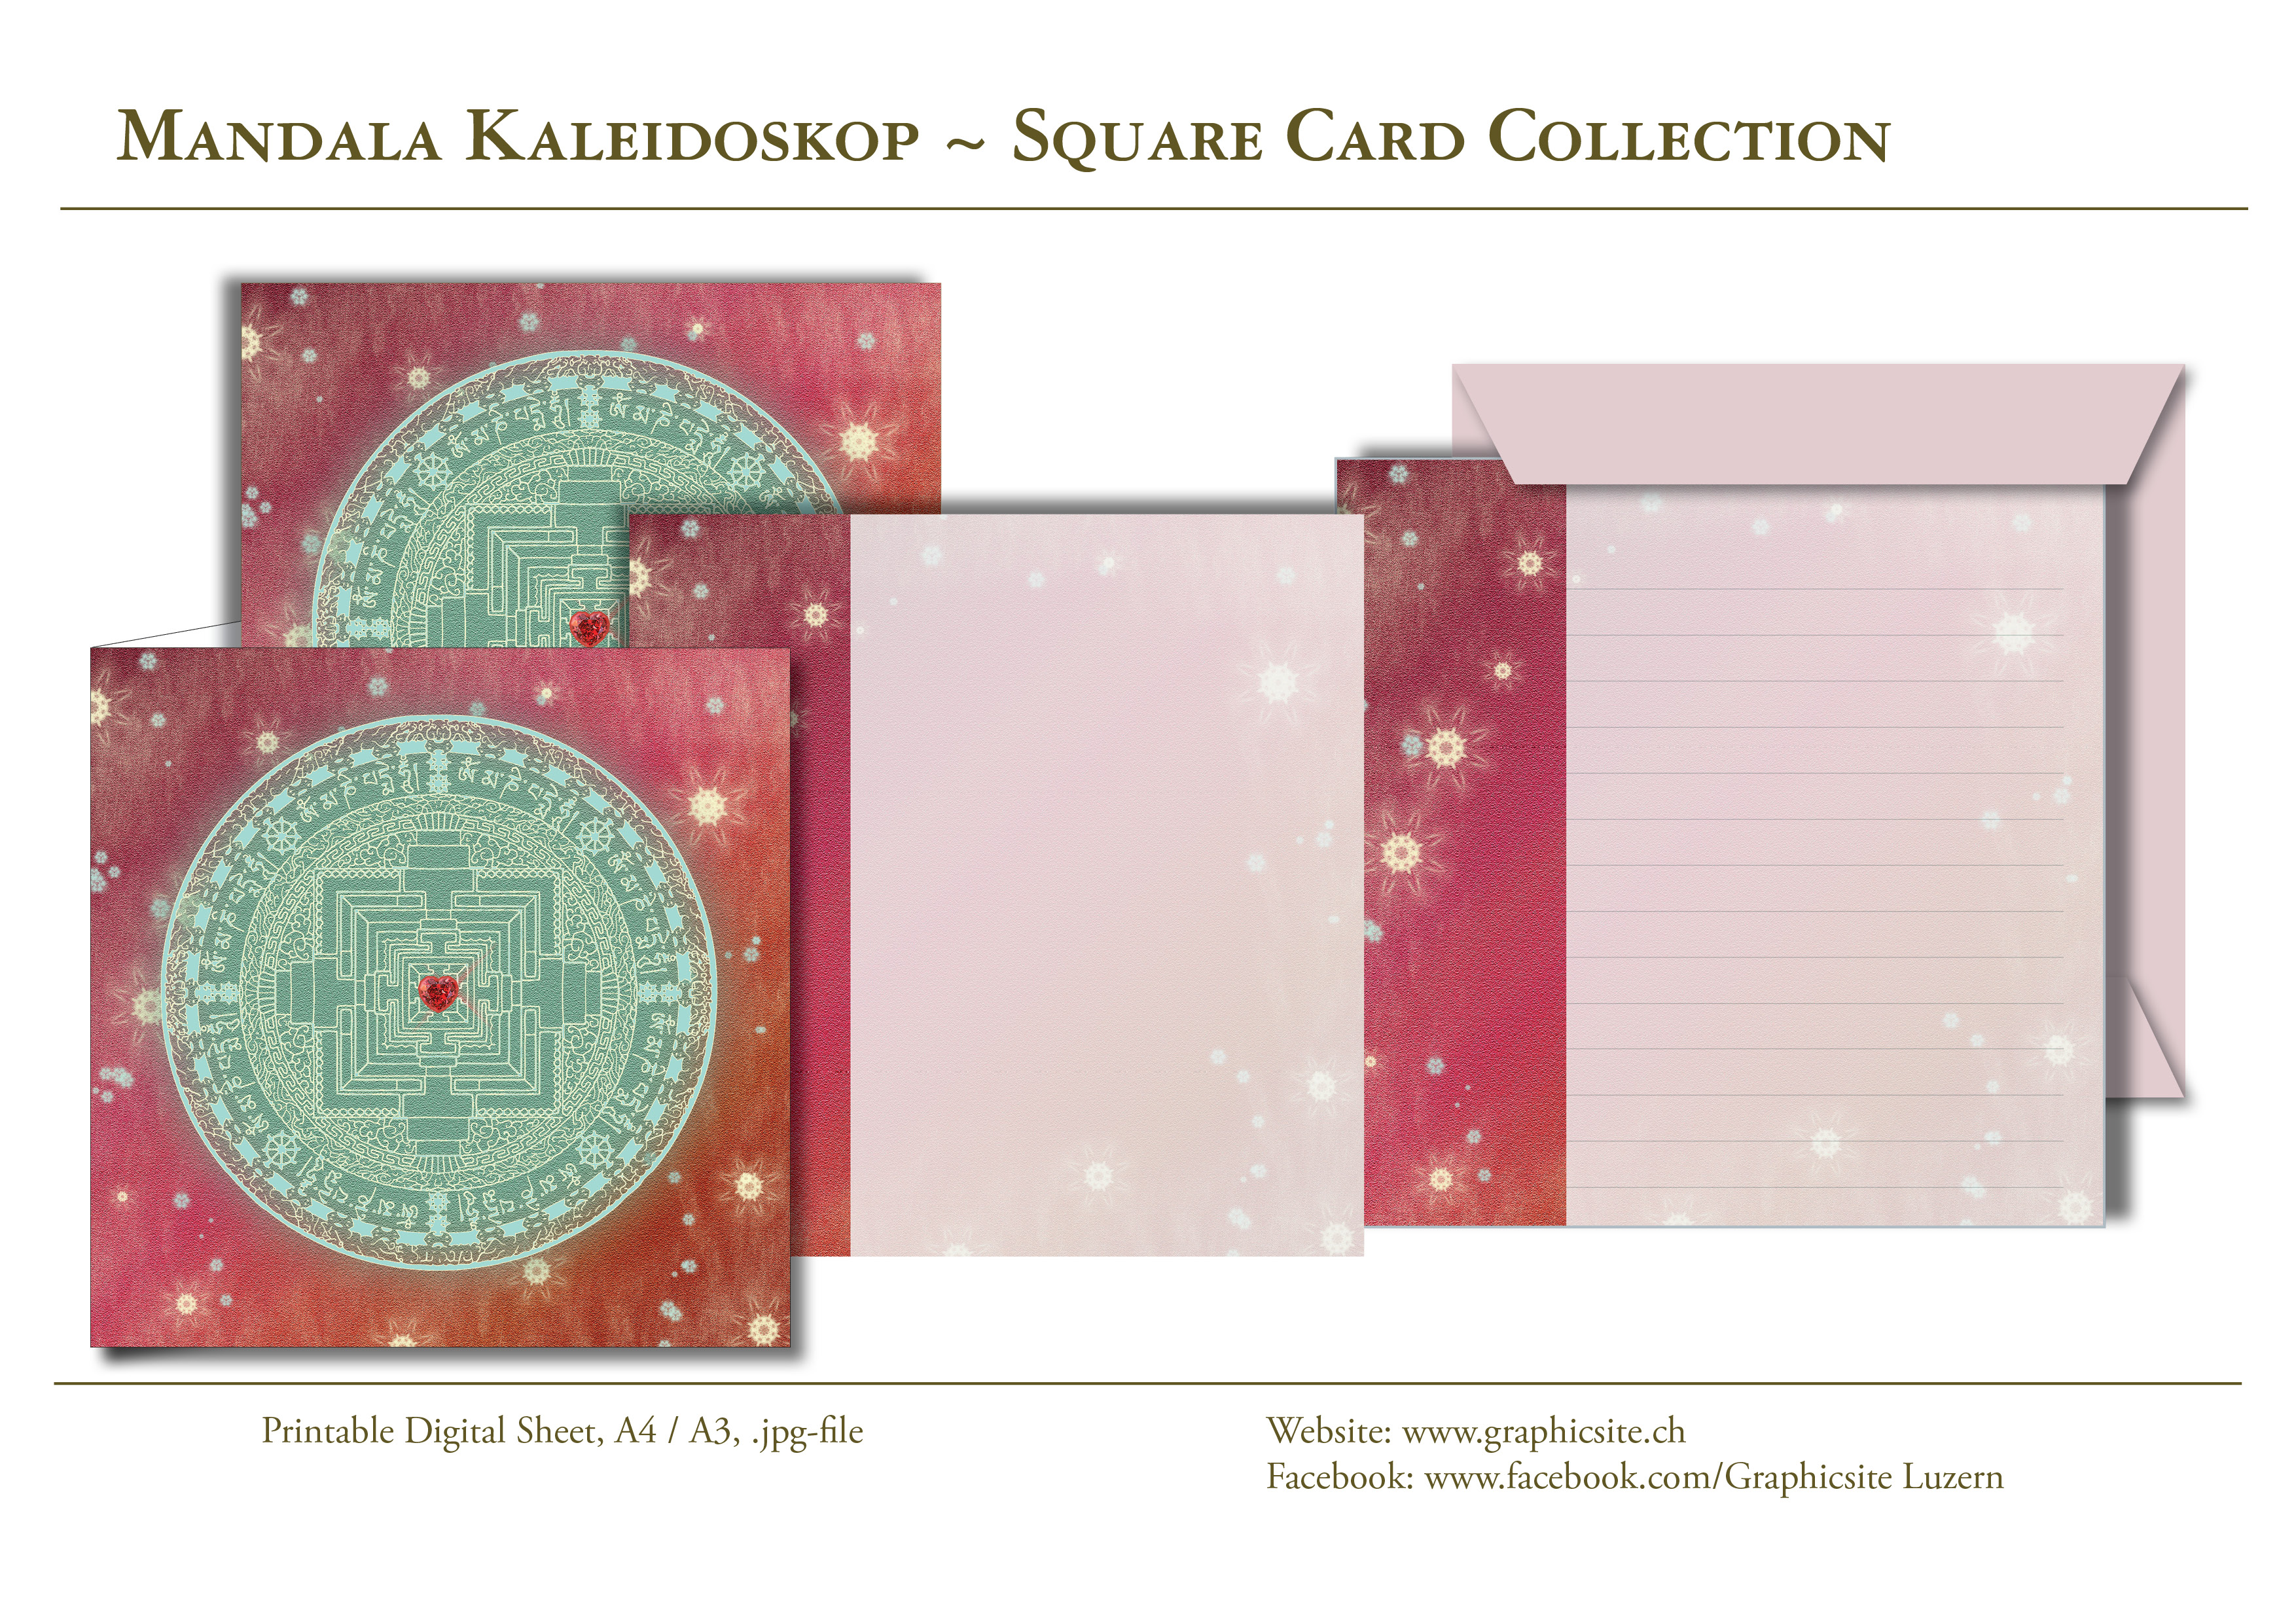 Printable Digital Sheets, Card Collections, Square Cards, Mandala, turquoise, green, red, heart, 